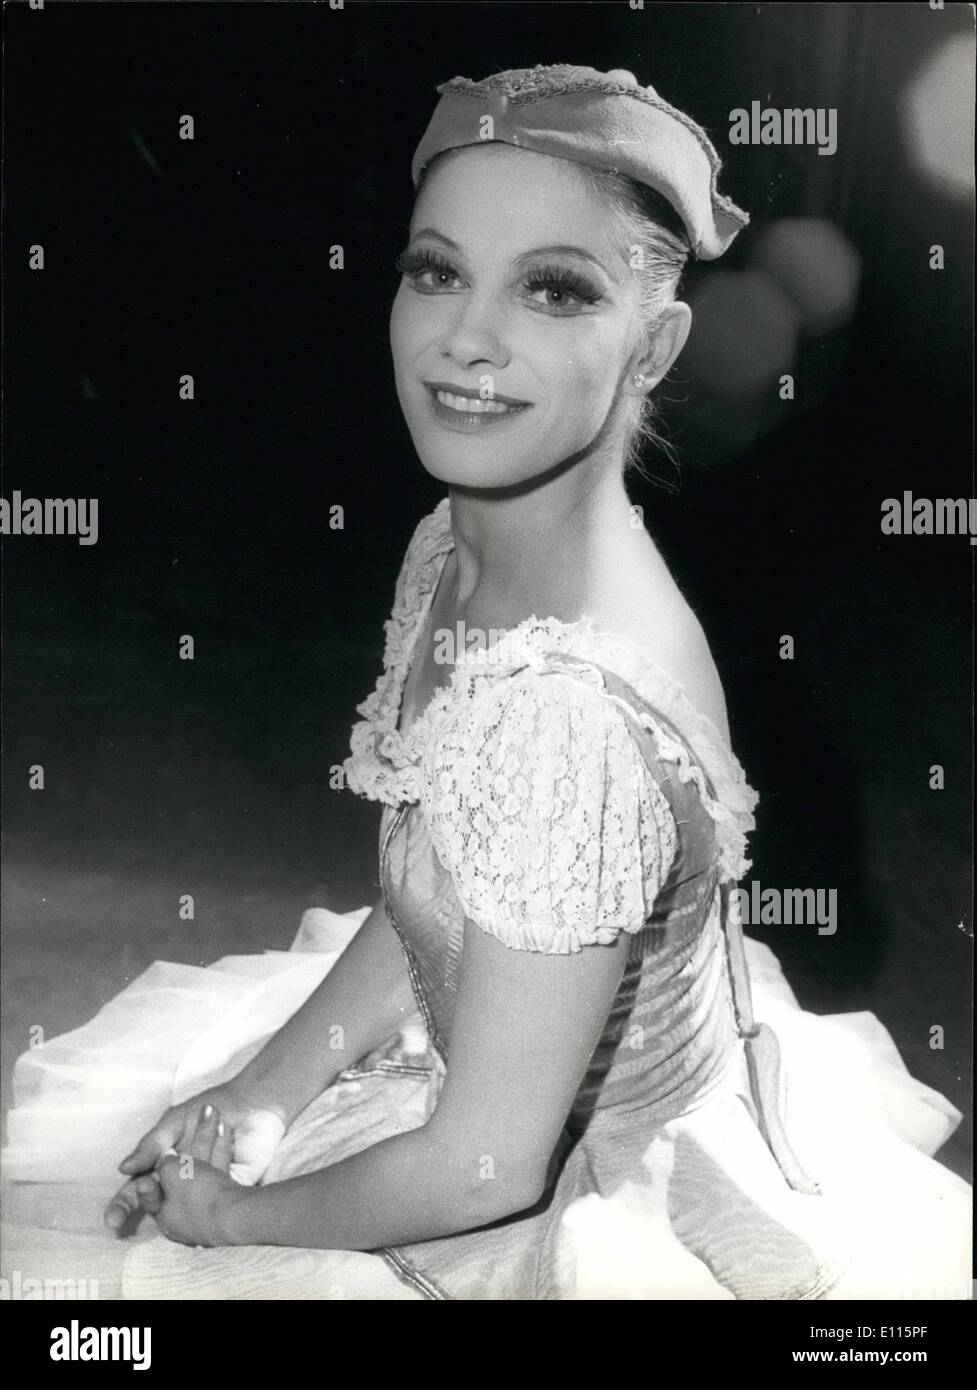 Jan. 01, 1976 - Dancer's fairy tale comes true : celebrating a magic start to the new year - Vivien Loeber last night shot to stardom from the racks of the corps de ballet at the royal festival hall in London. Vivien, 23, had just returned to the wings after taking part in the dance of the mirlitons in yesterday's matinee performance of the ''Nutcracker'' when Noleen Nicol, ensactiong the surges plum fairy, limped off stage with a sprained ankle Stock Photo